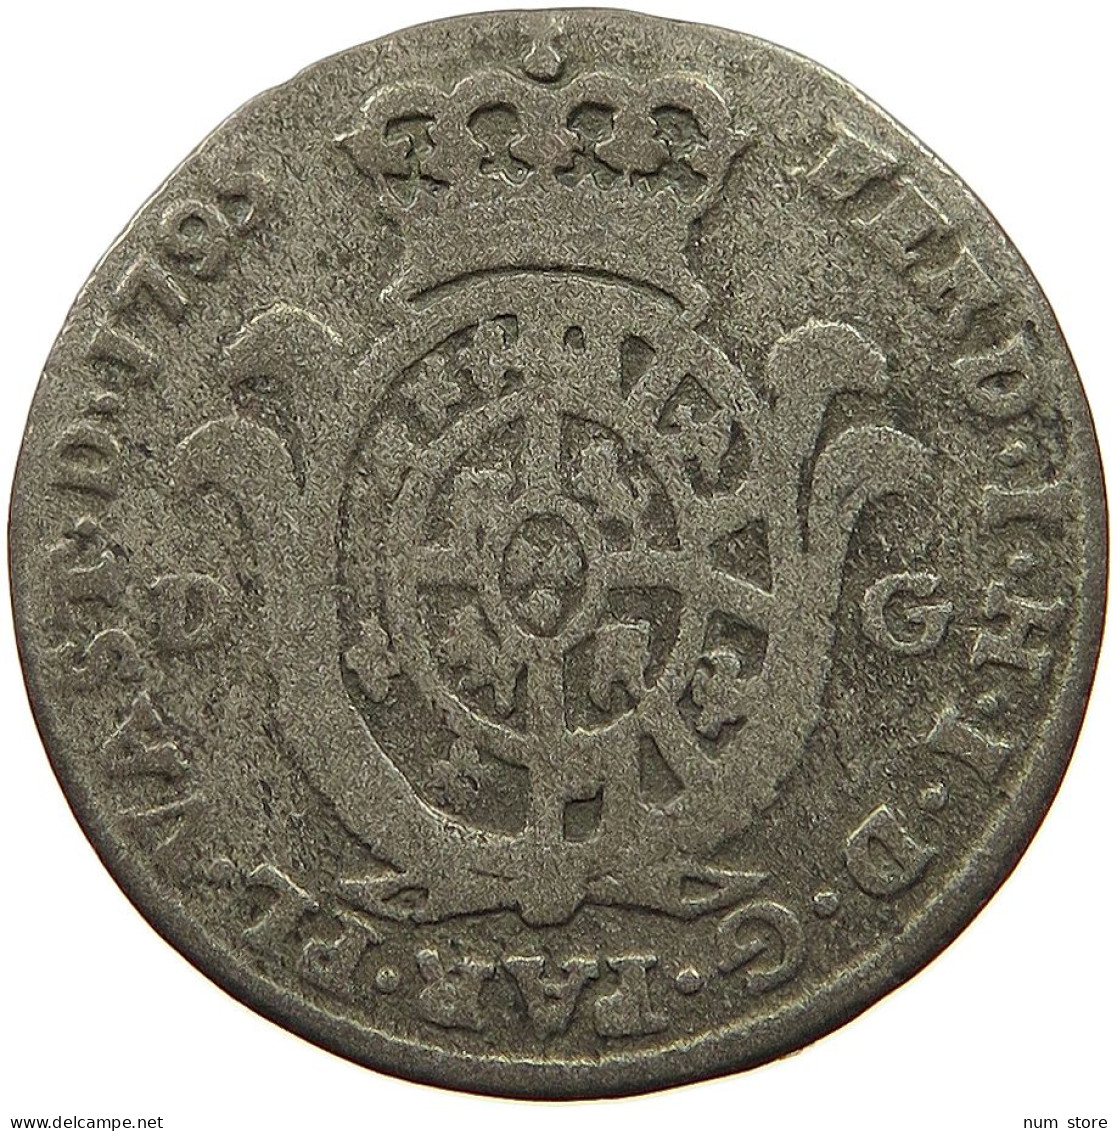 ITALY STATES PARMA 20 SOLSI 1795  #t060 0451 - Parme